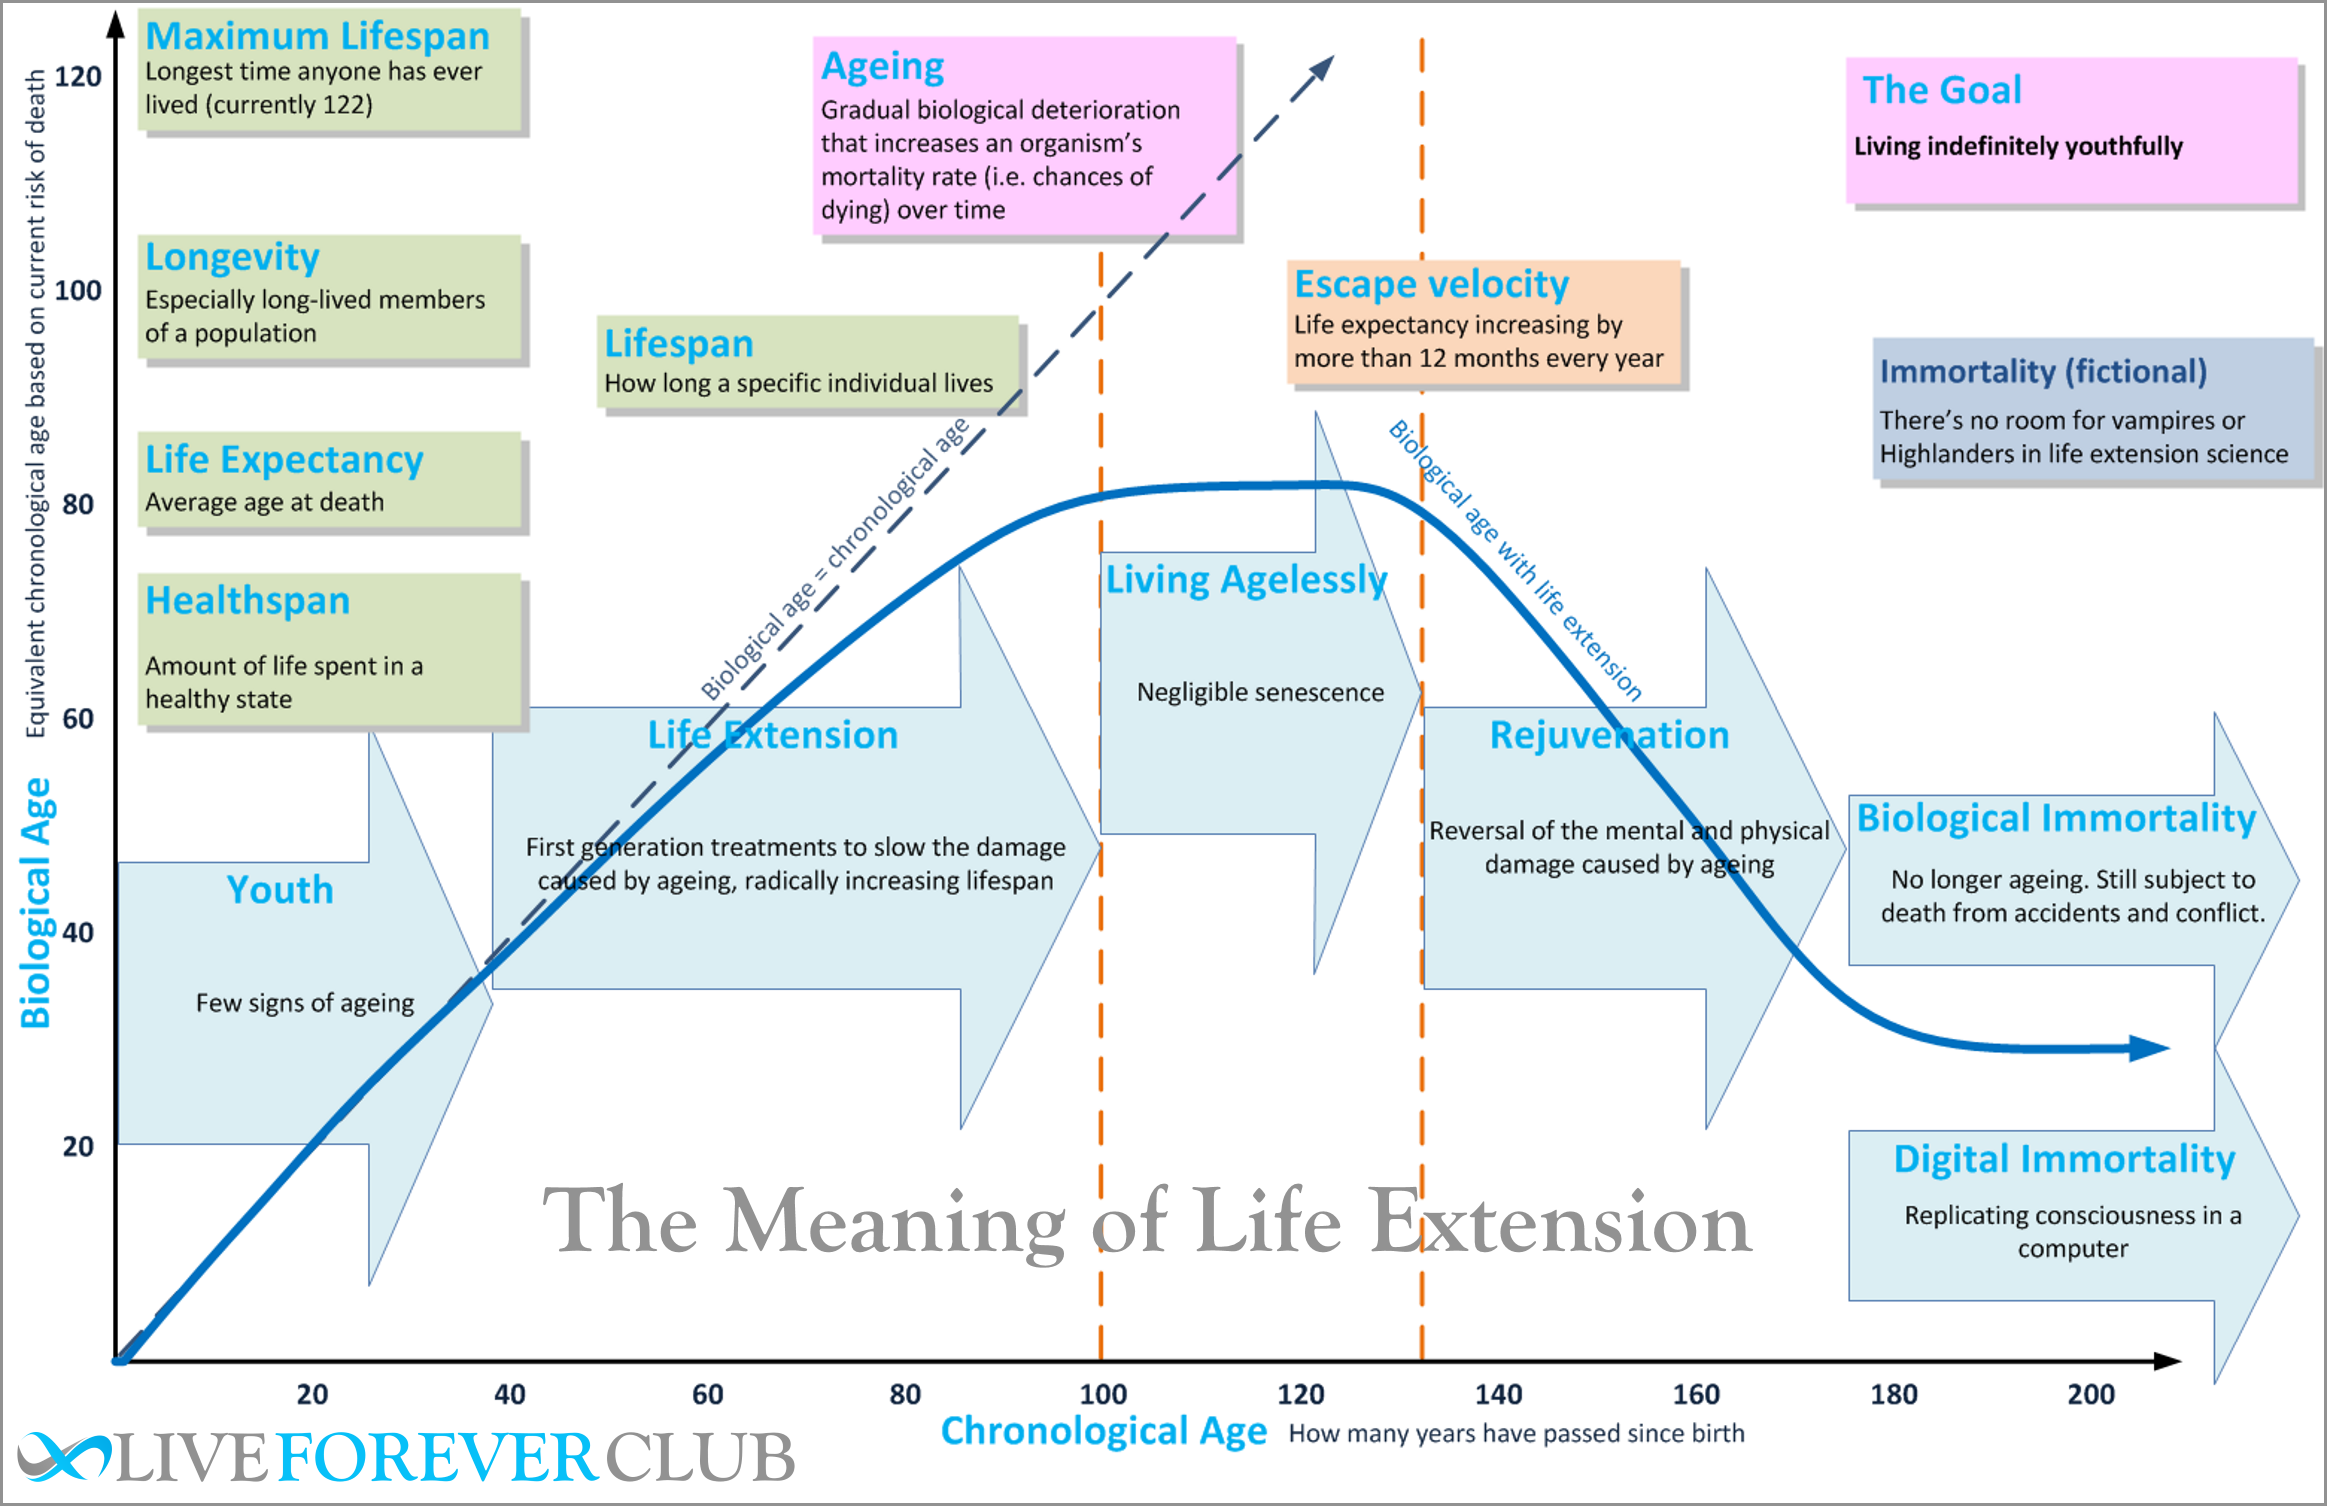 The meaning of life extension